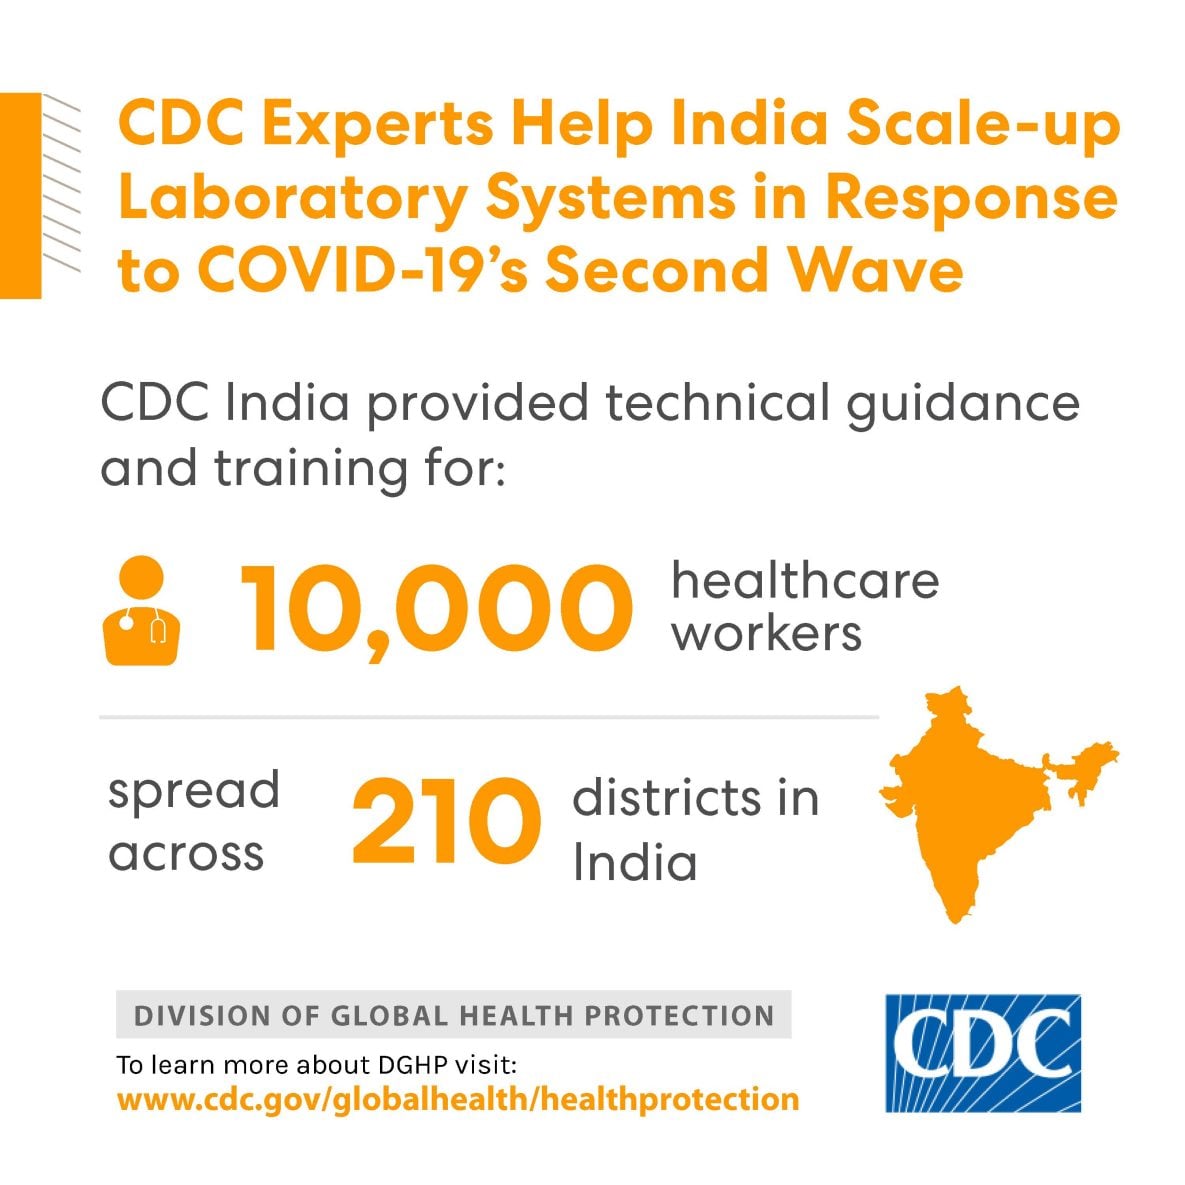 CDC Experts Help India Scale-up Laboratory Systems in Response to COVID-19’s Second Wave